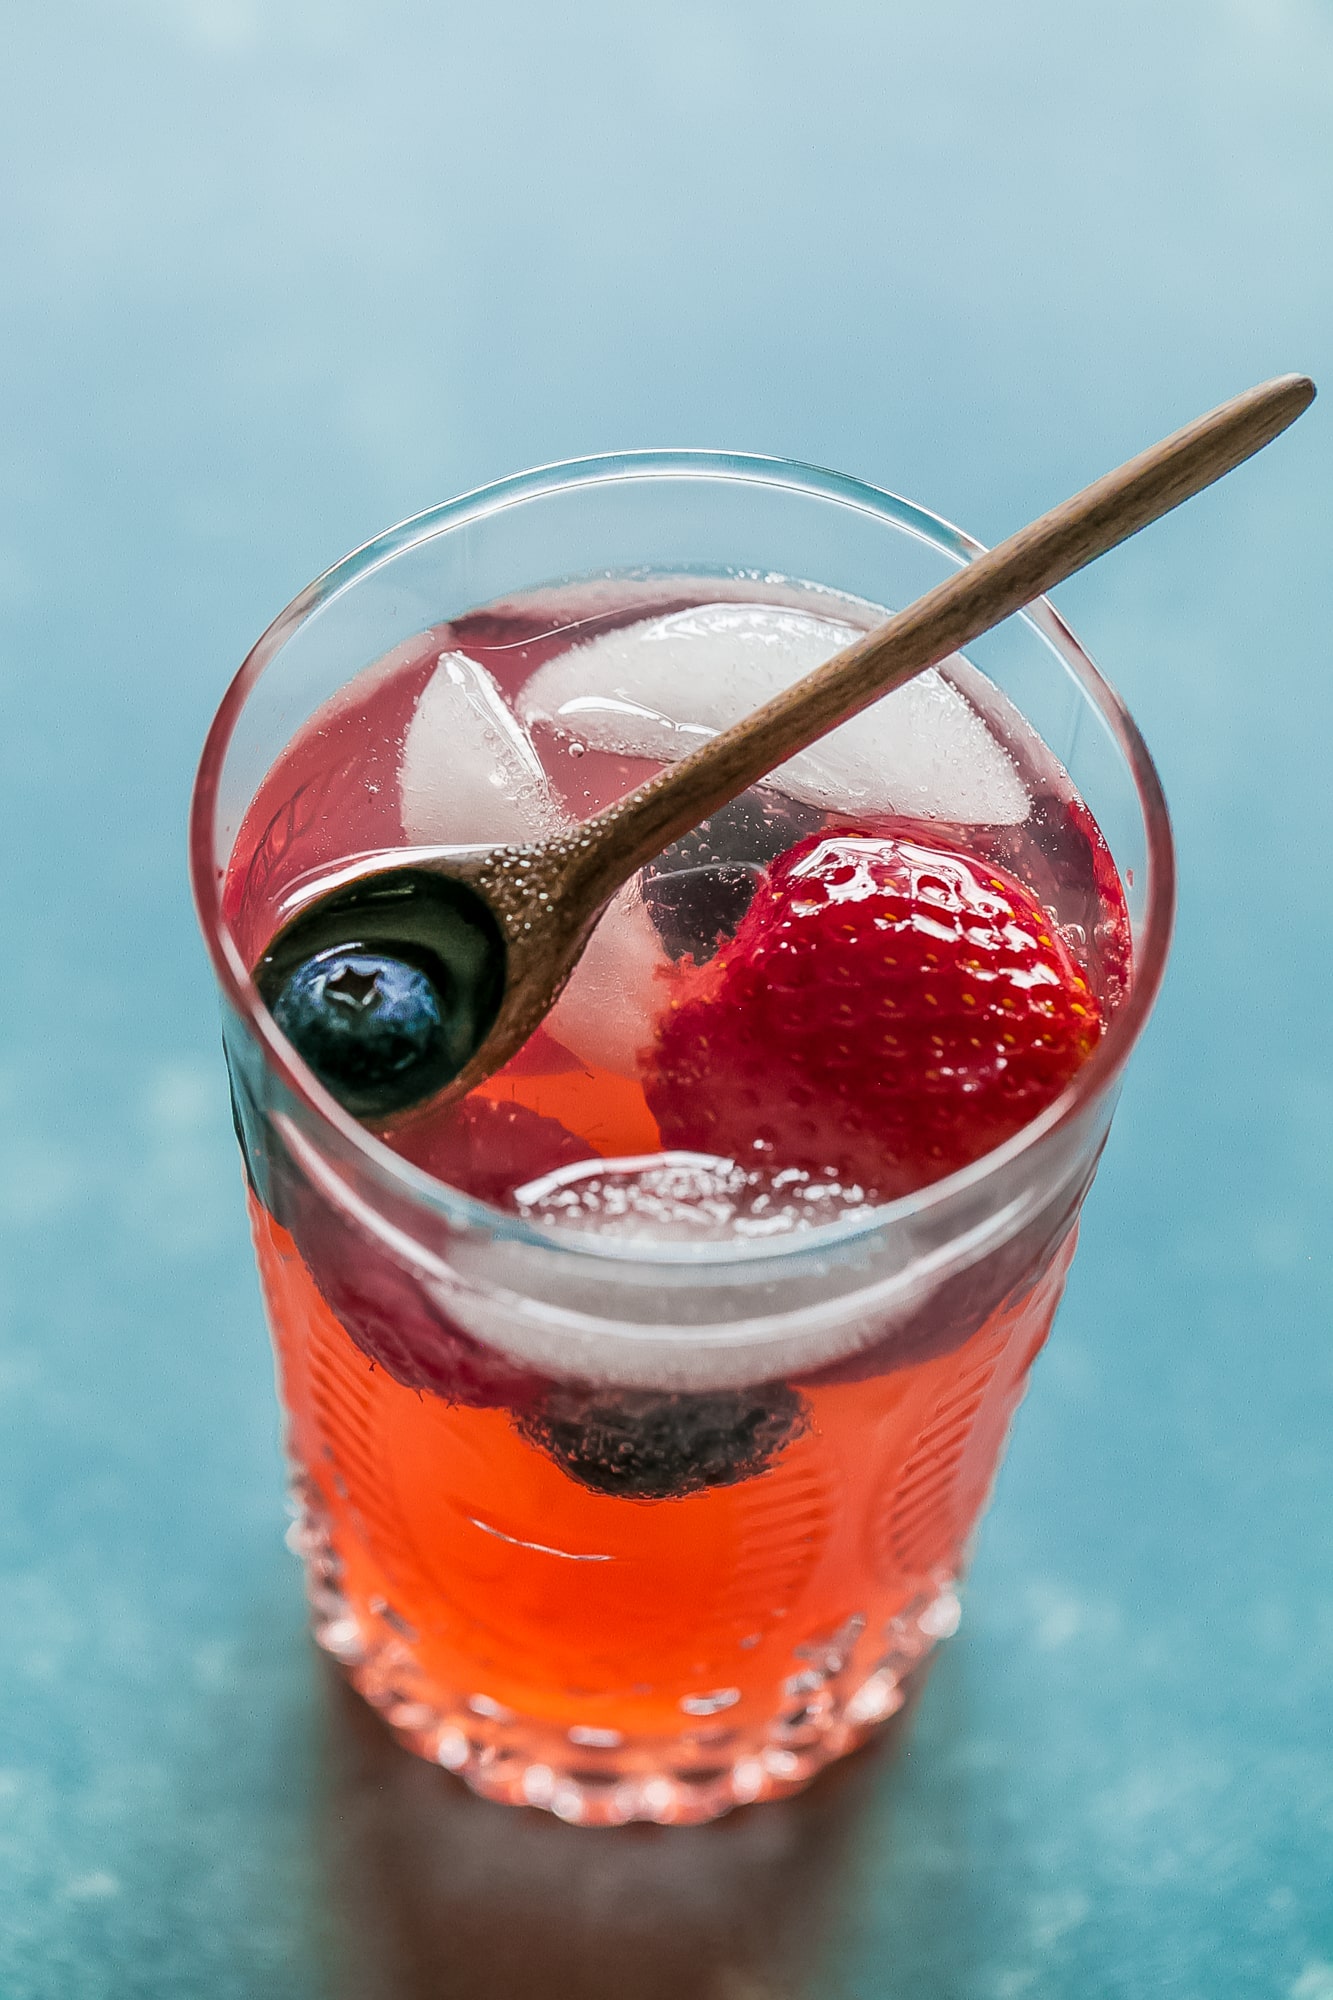 This is a great and delicious red white and blue drink! 